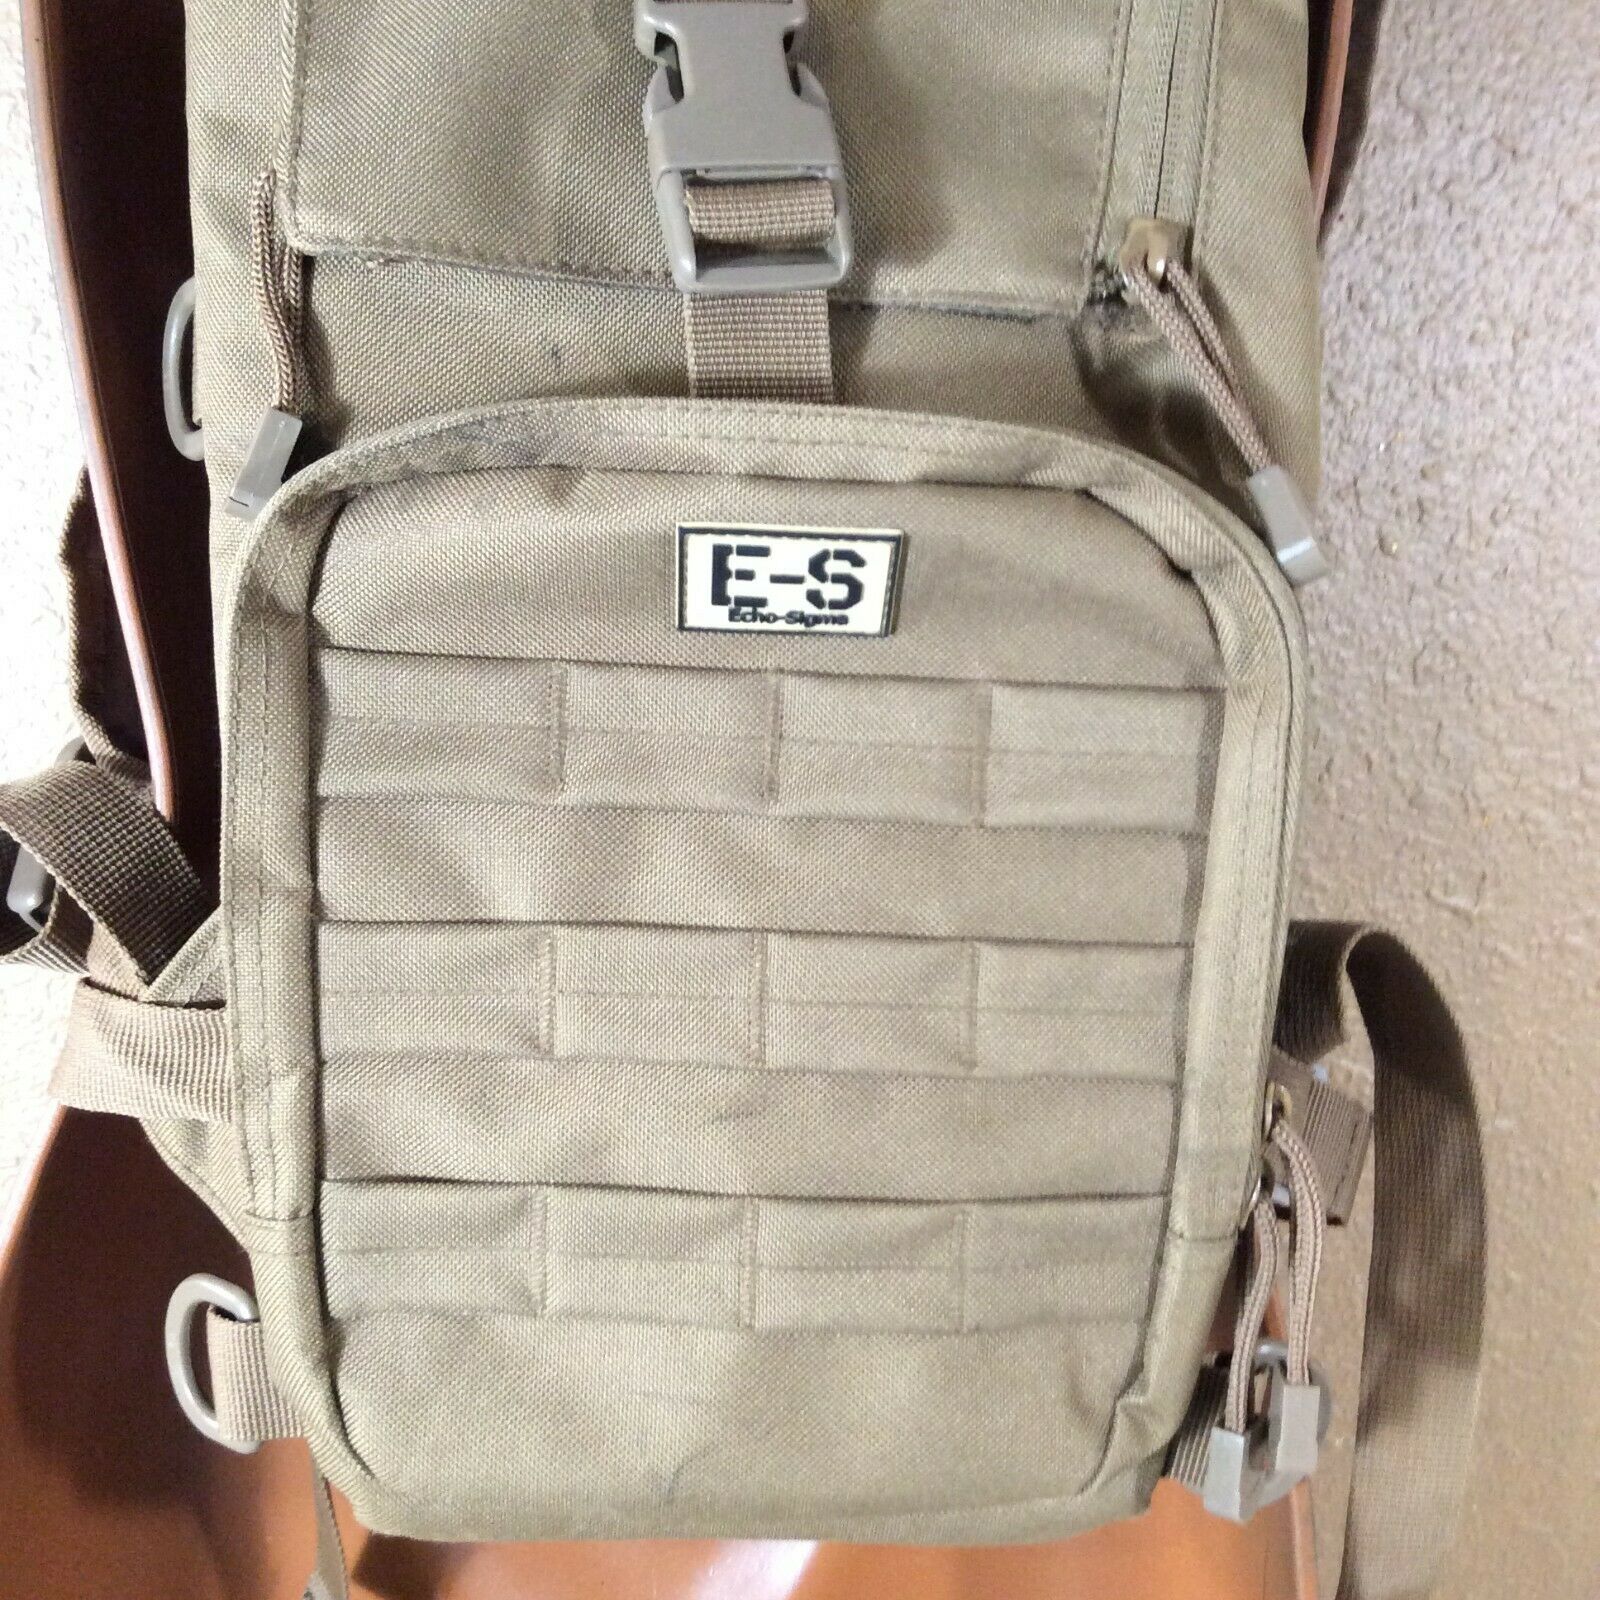 Echo-Sigma E-S Bear Grylls Brown Tactical Backpack Survival Bag H335